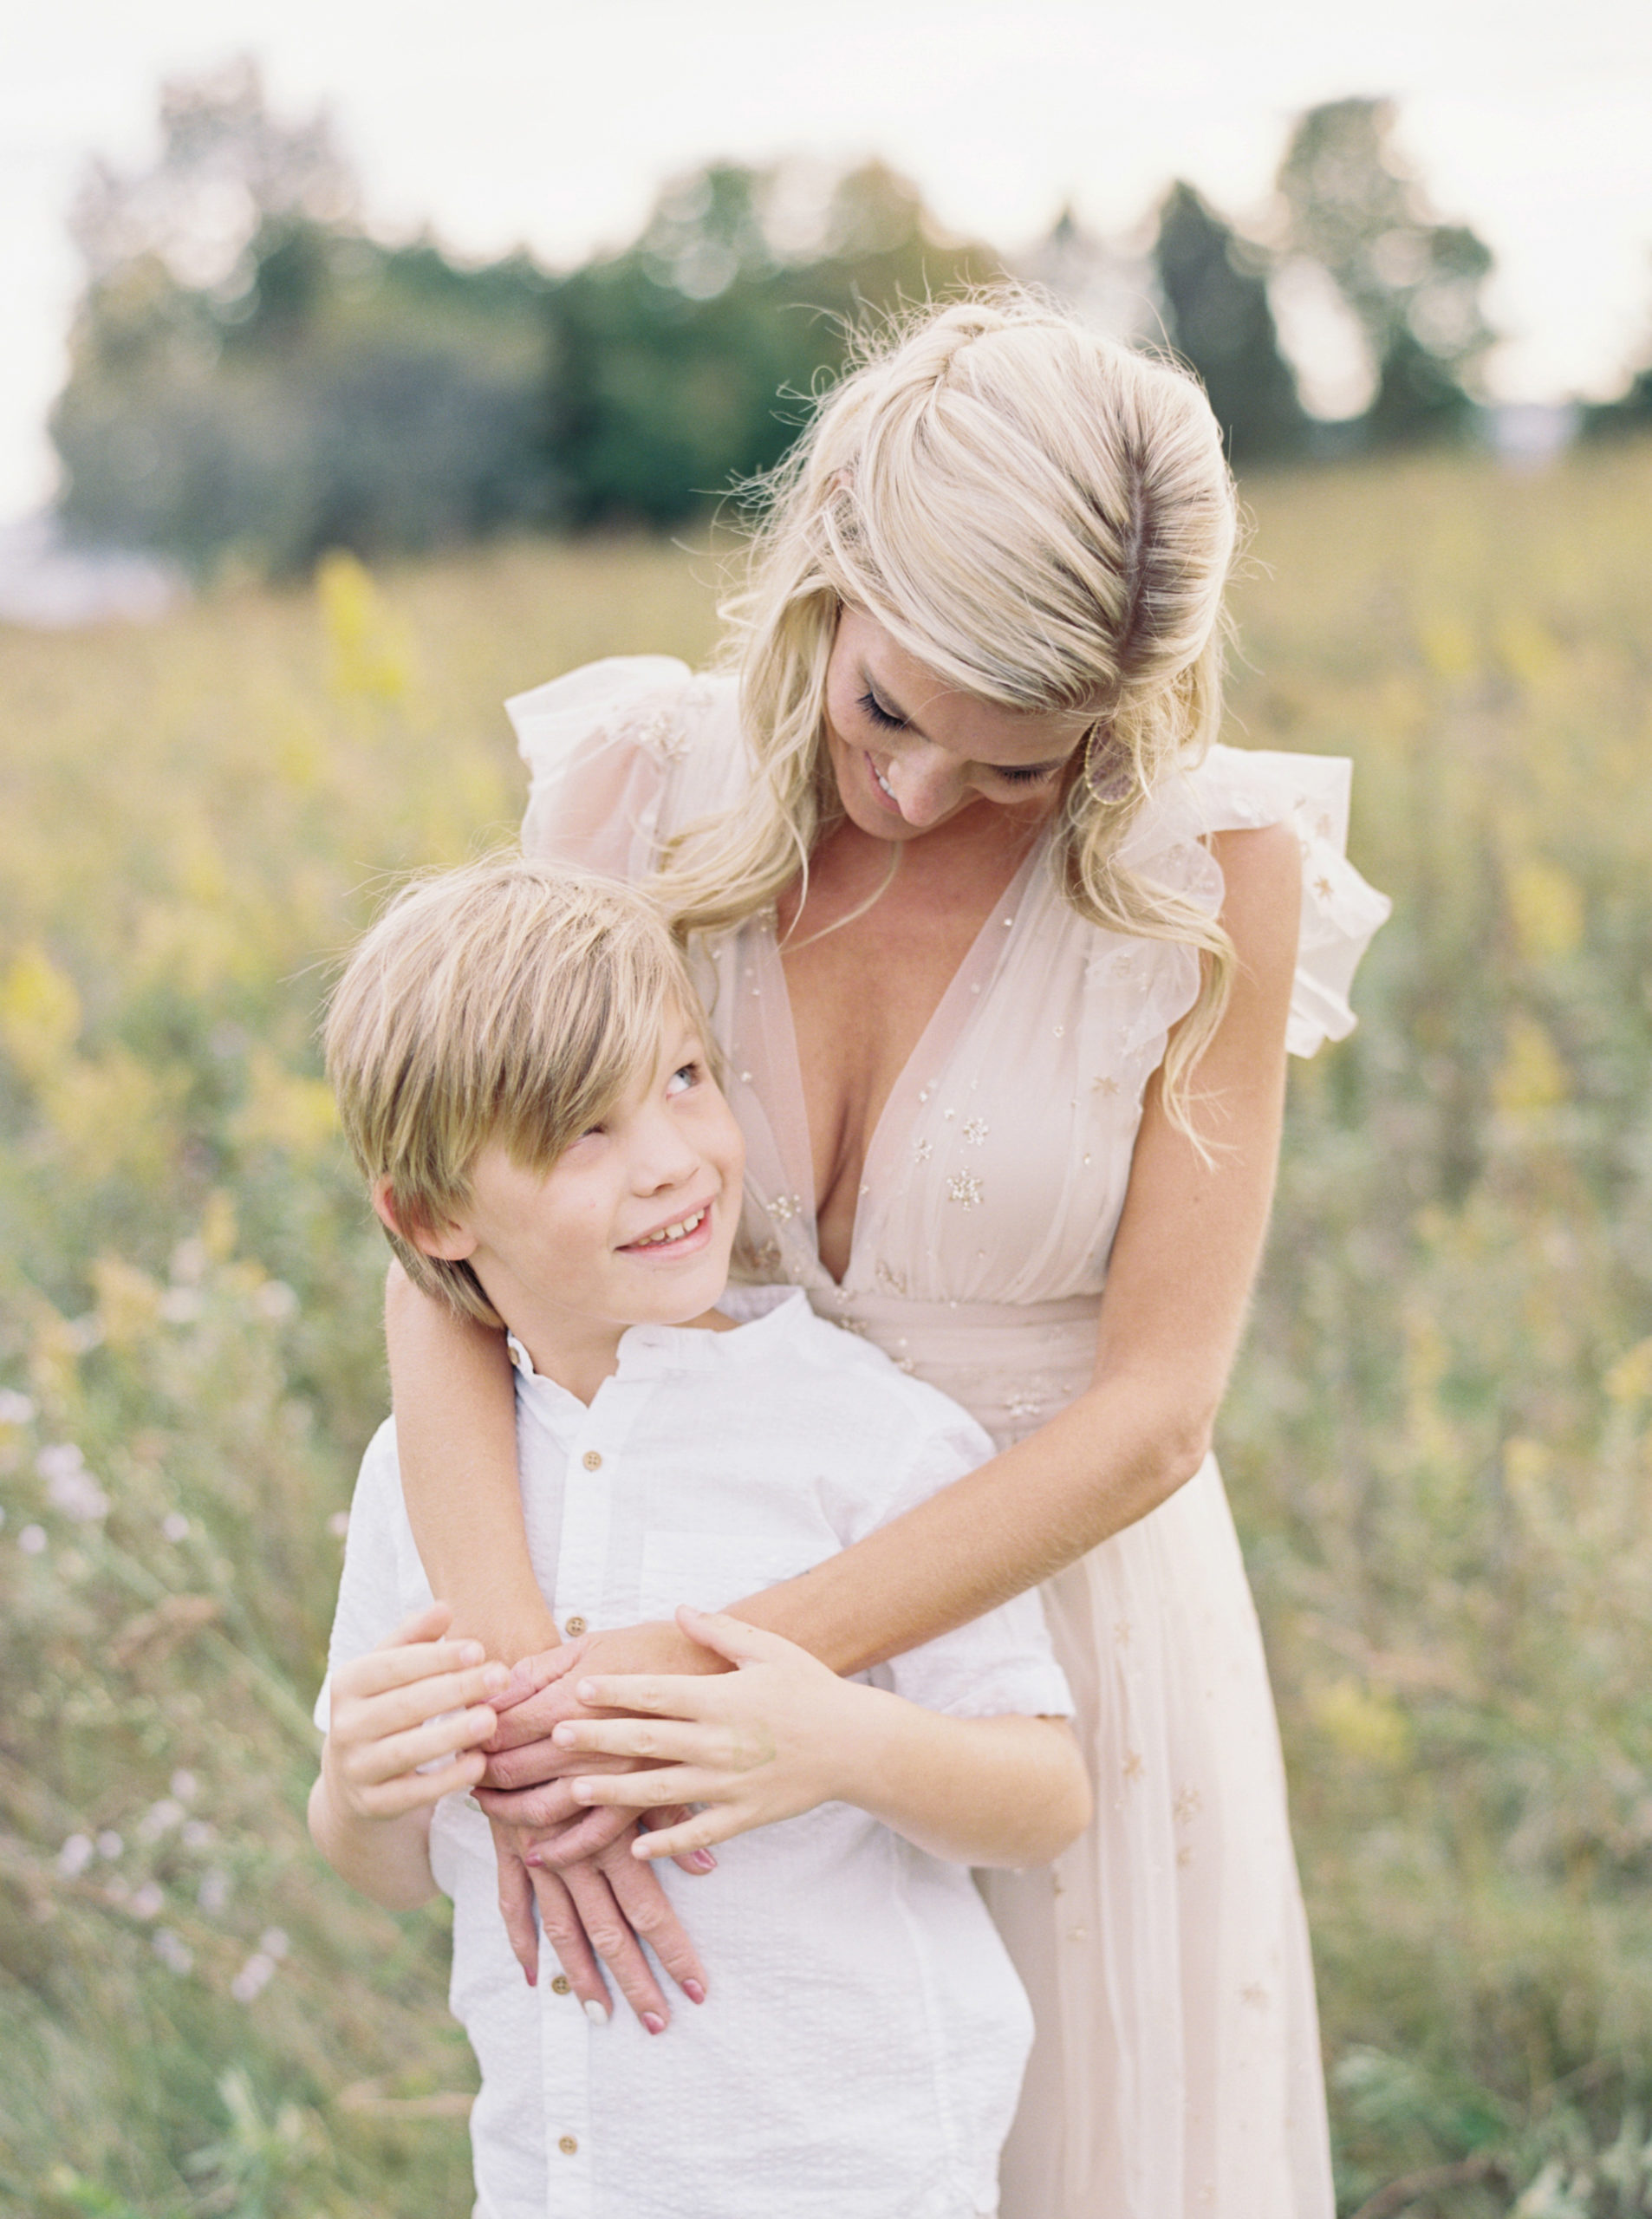 Mother and Son cuddle in beautiful middleton grassy field